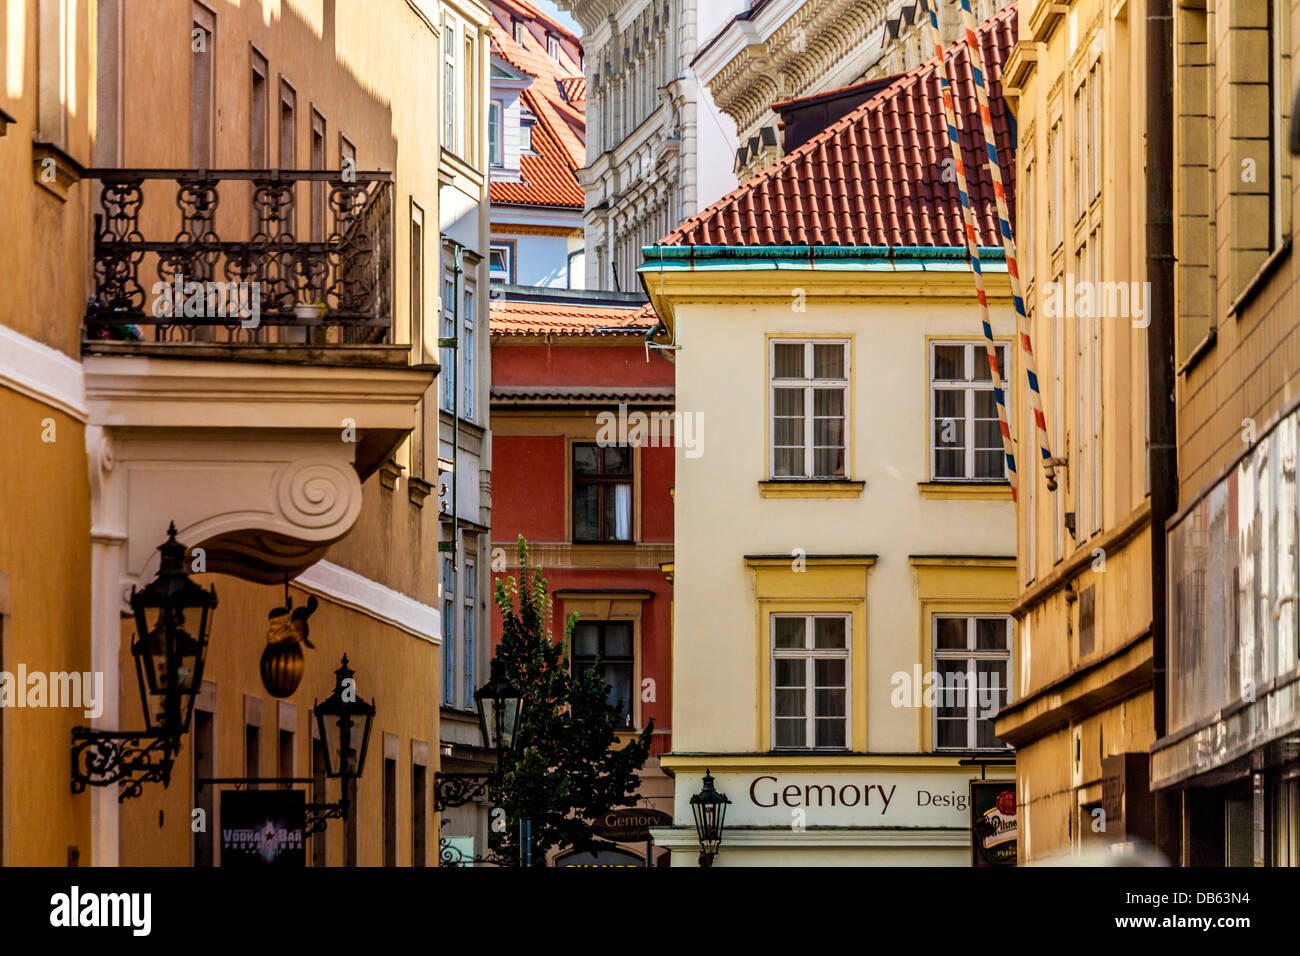 Close-up of buildings showing various architectural styles in the Old Town district of Prague. Stock Photo